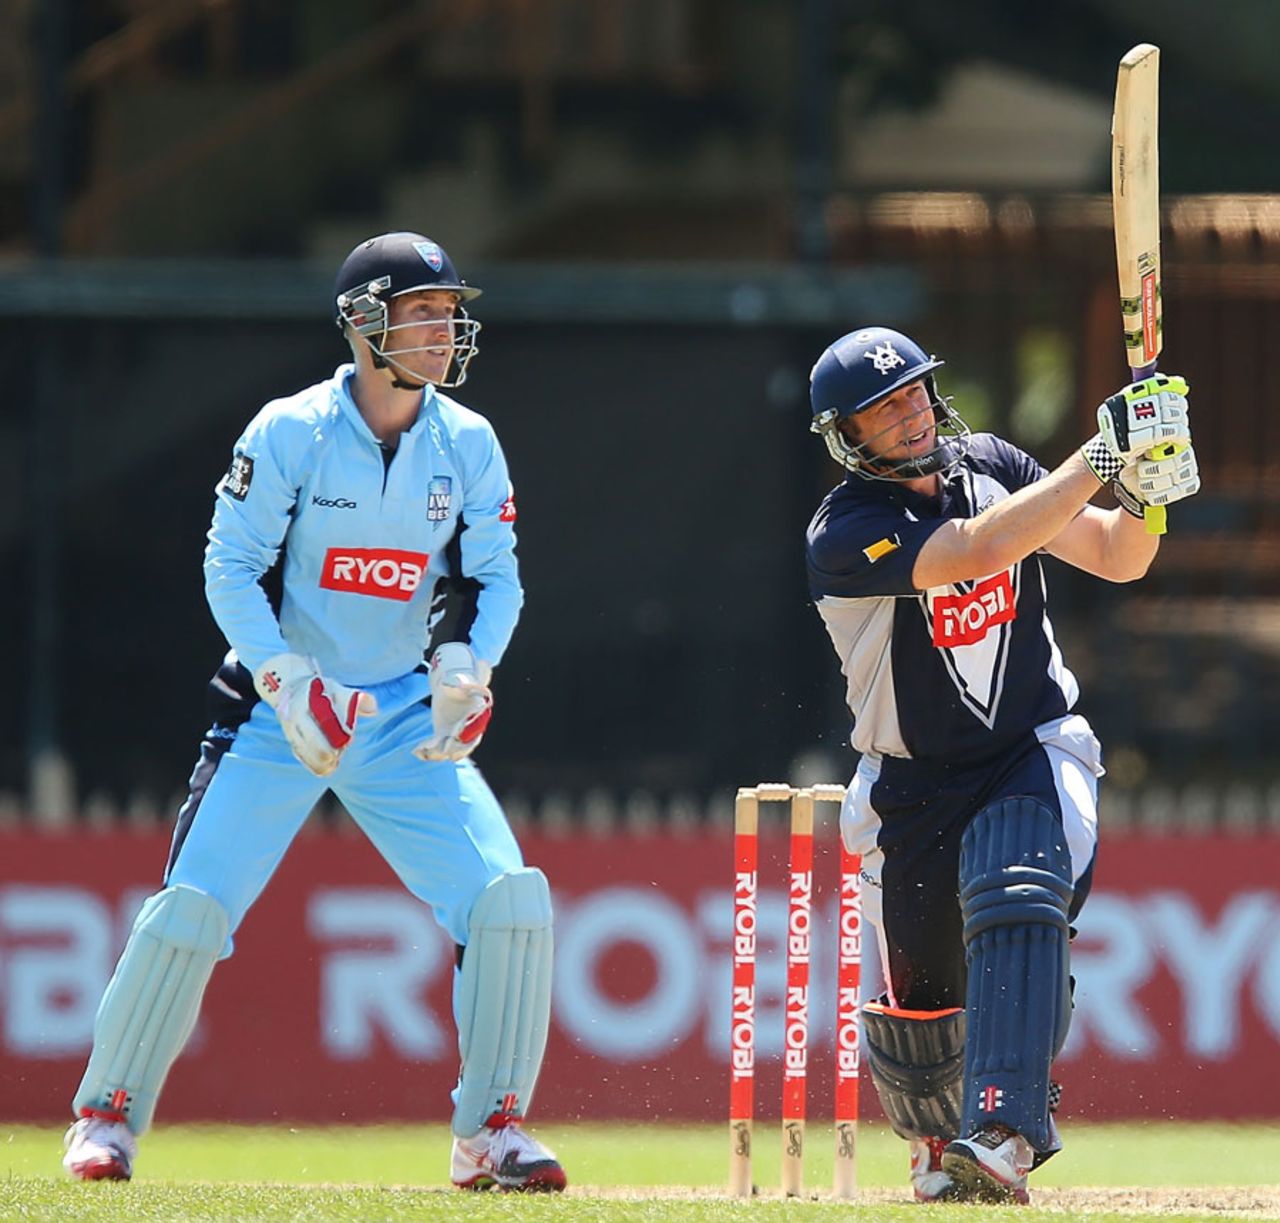 David Hussey hit 71 off 52 and shared a 92-run stand with Matthew Wade, New South Wales v Victoria, Ryobi One-Day Cup, Sydney, October 20, 2013